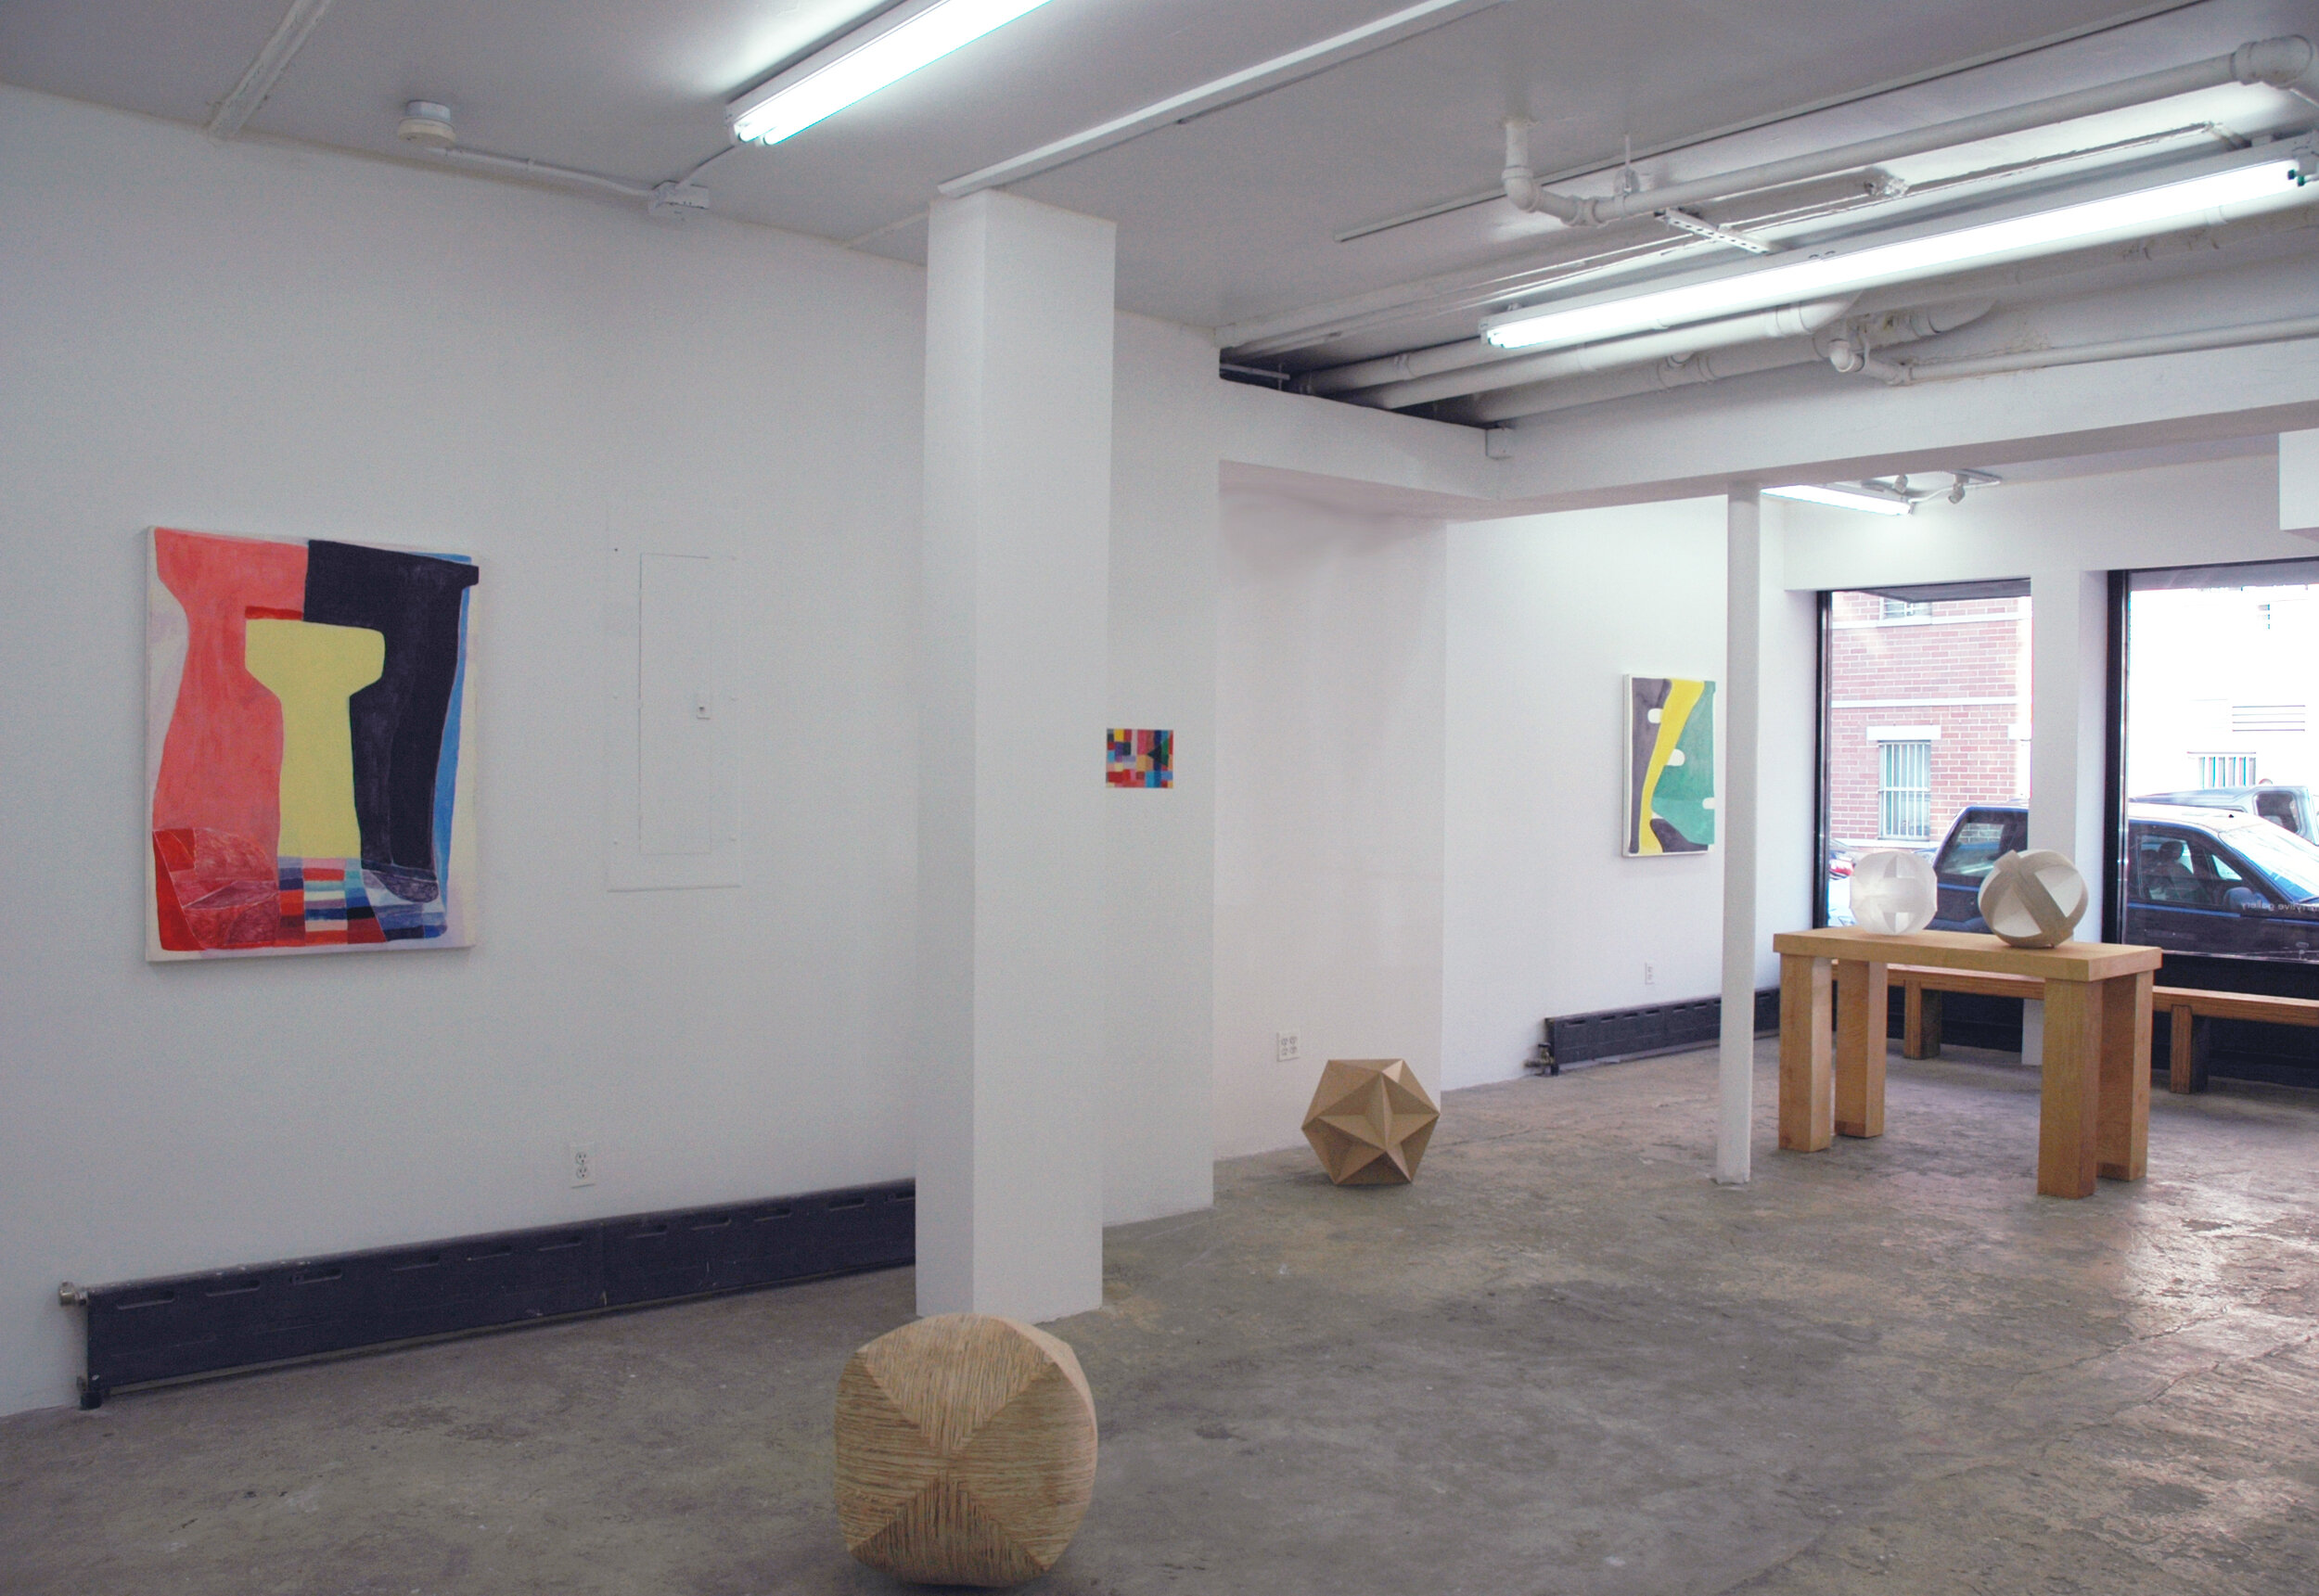 Installation image from the 2012 Charles Dunn exhibition, hell on earth, at Cindy Rucker Gallery